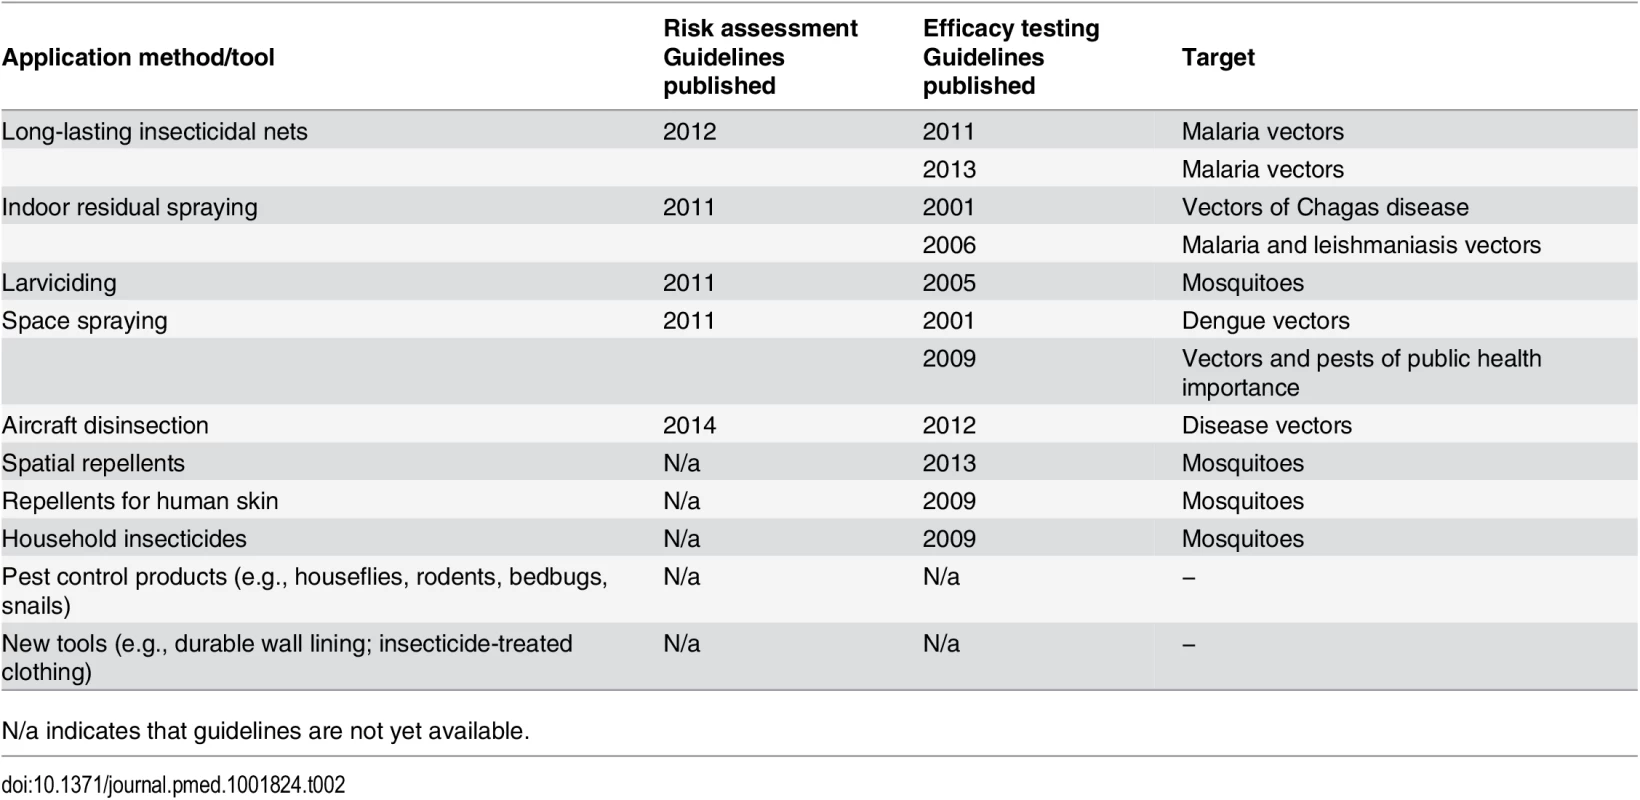 Global authoritative guidelines on efficacy testing and risk assessment in relation to each vector-control application method or tool [<em class=&quot;ref&quot;>23</em>].